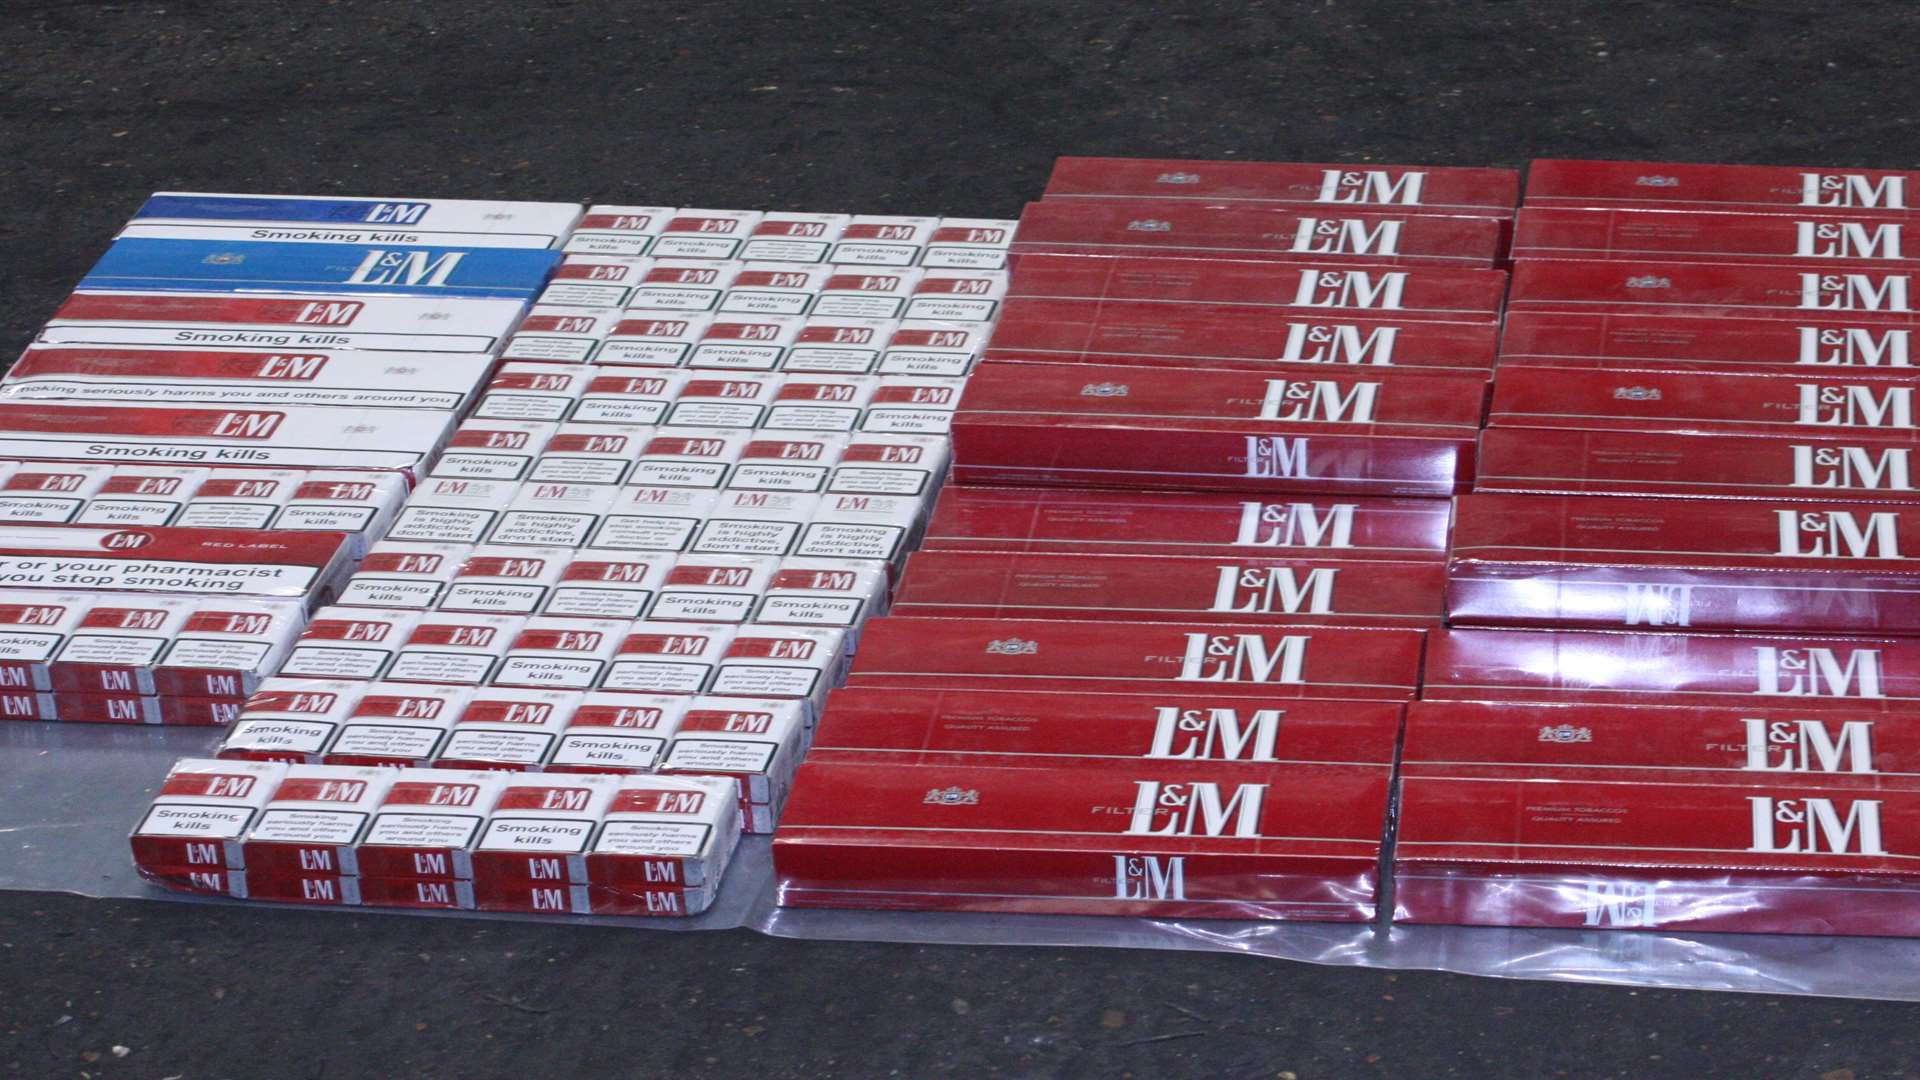 Some of the cigarettes seized